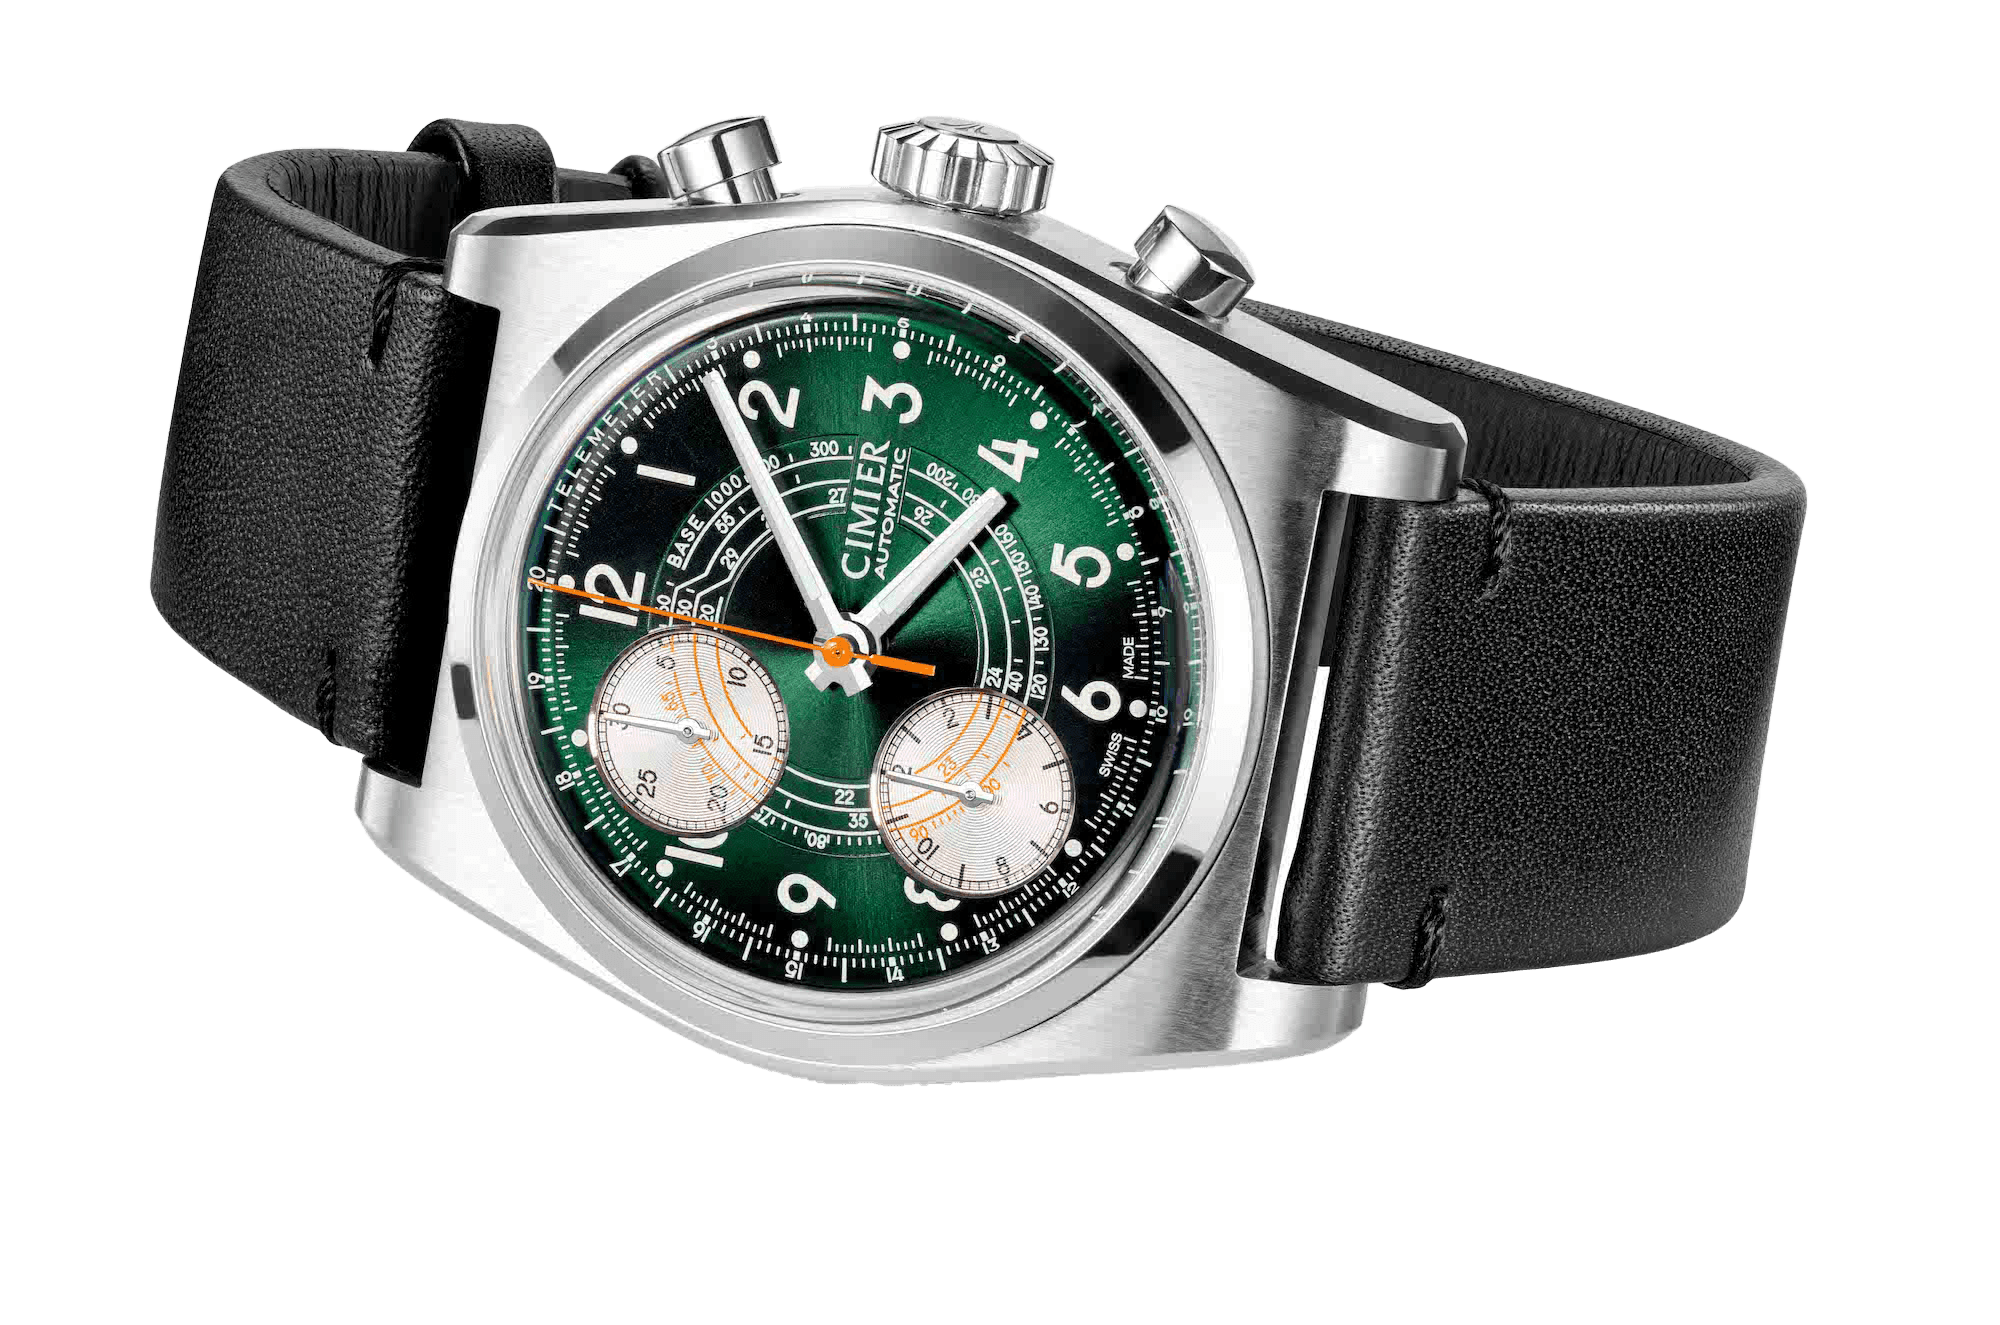 Side view of Cimier 711 Heritage Chronograph wristwatch with green dial